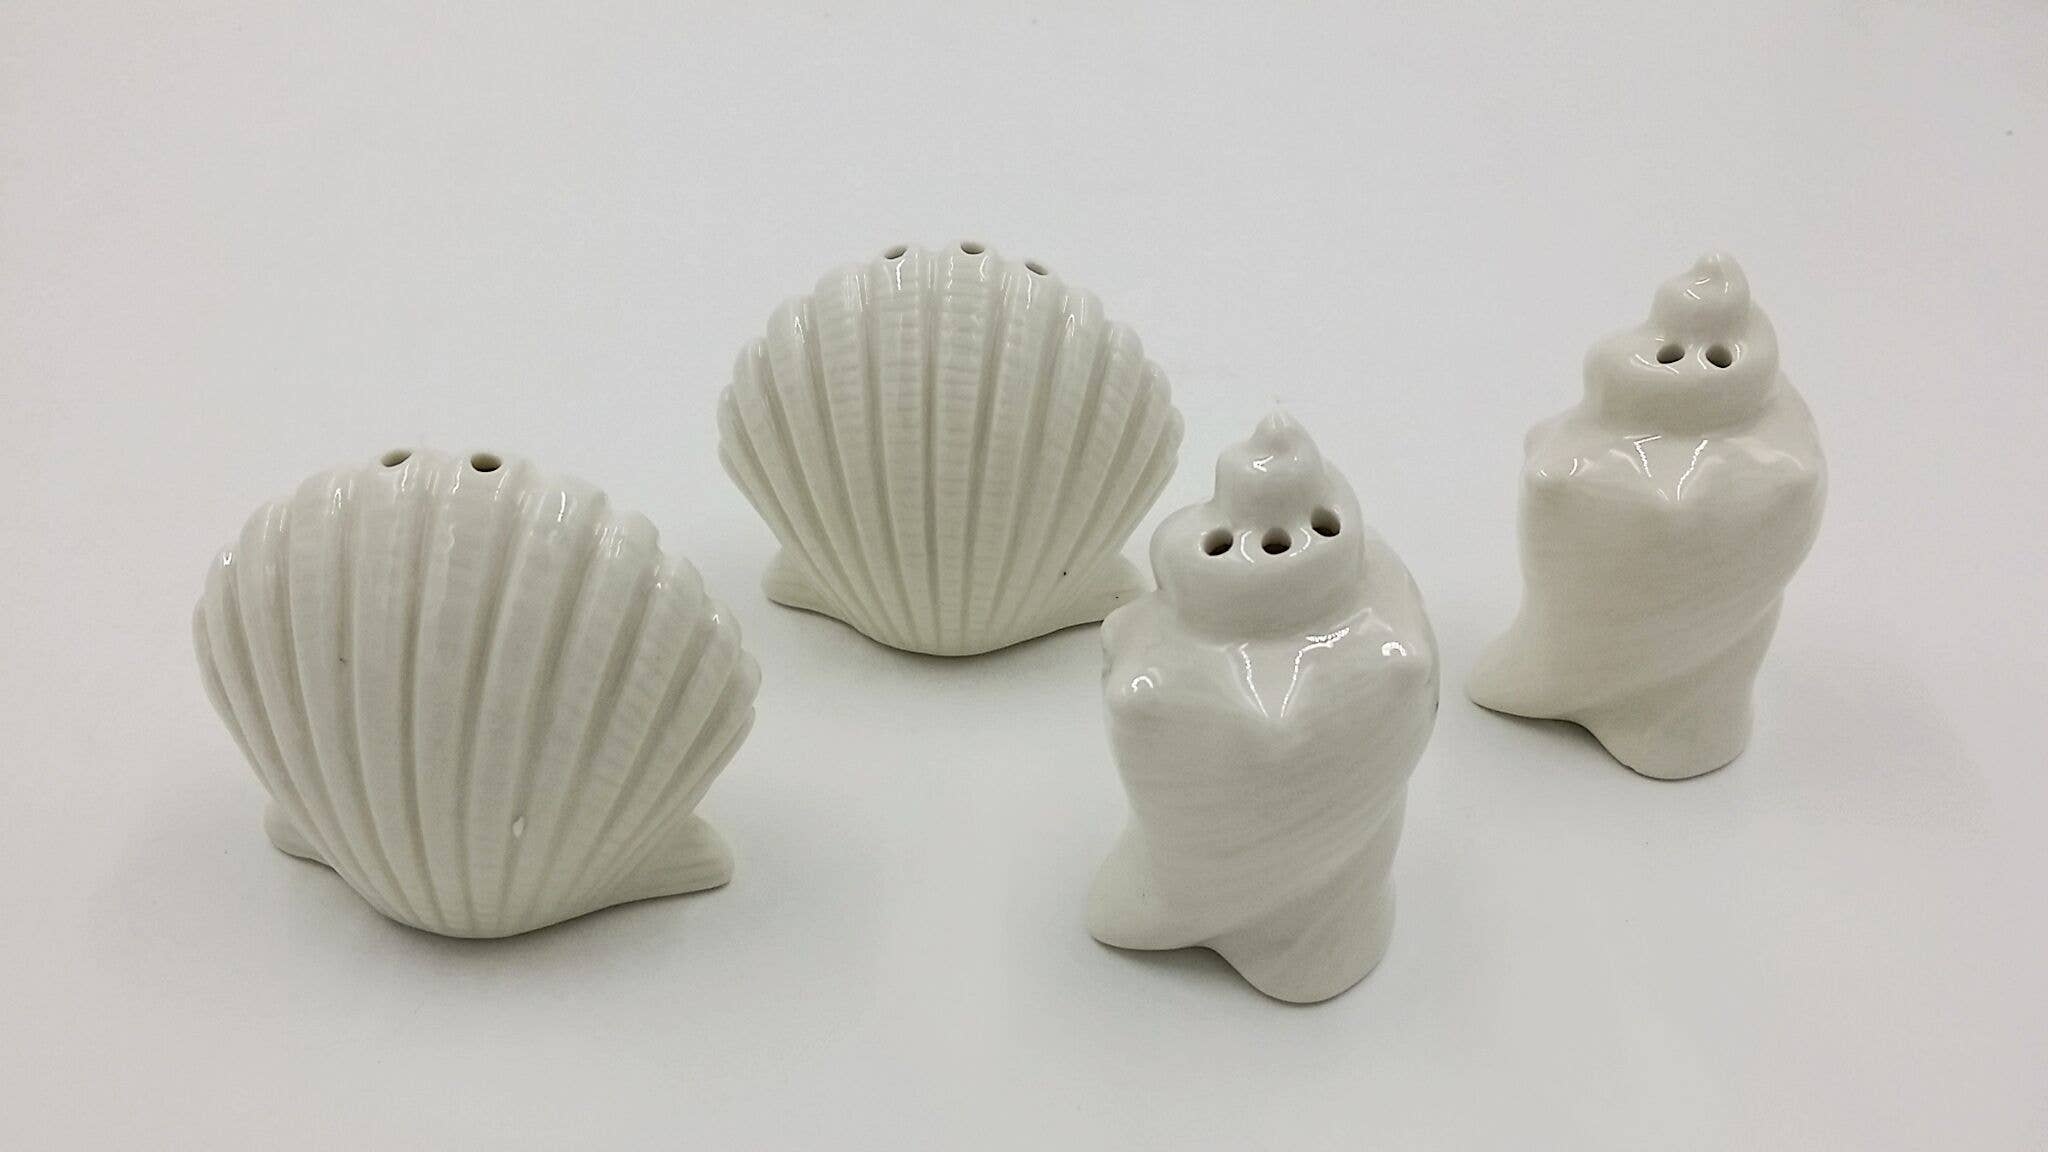 12 ~WHOLESALE LOT~3 PIECE SET OF ACORN SALT AND PEPPER SHAKERS WITH TRAY CERAMIC 